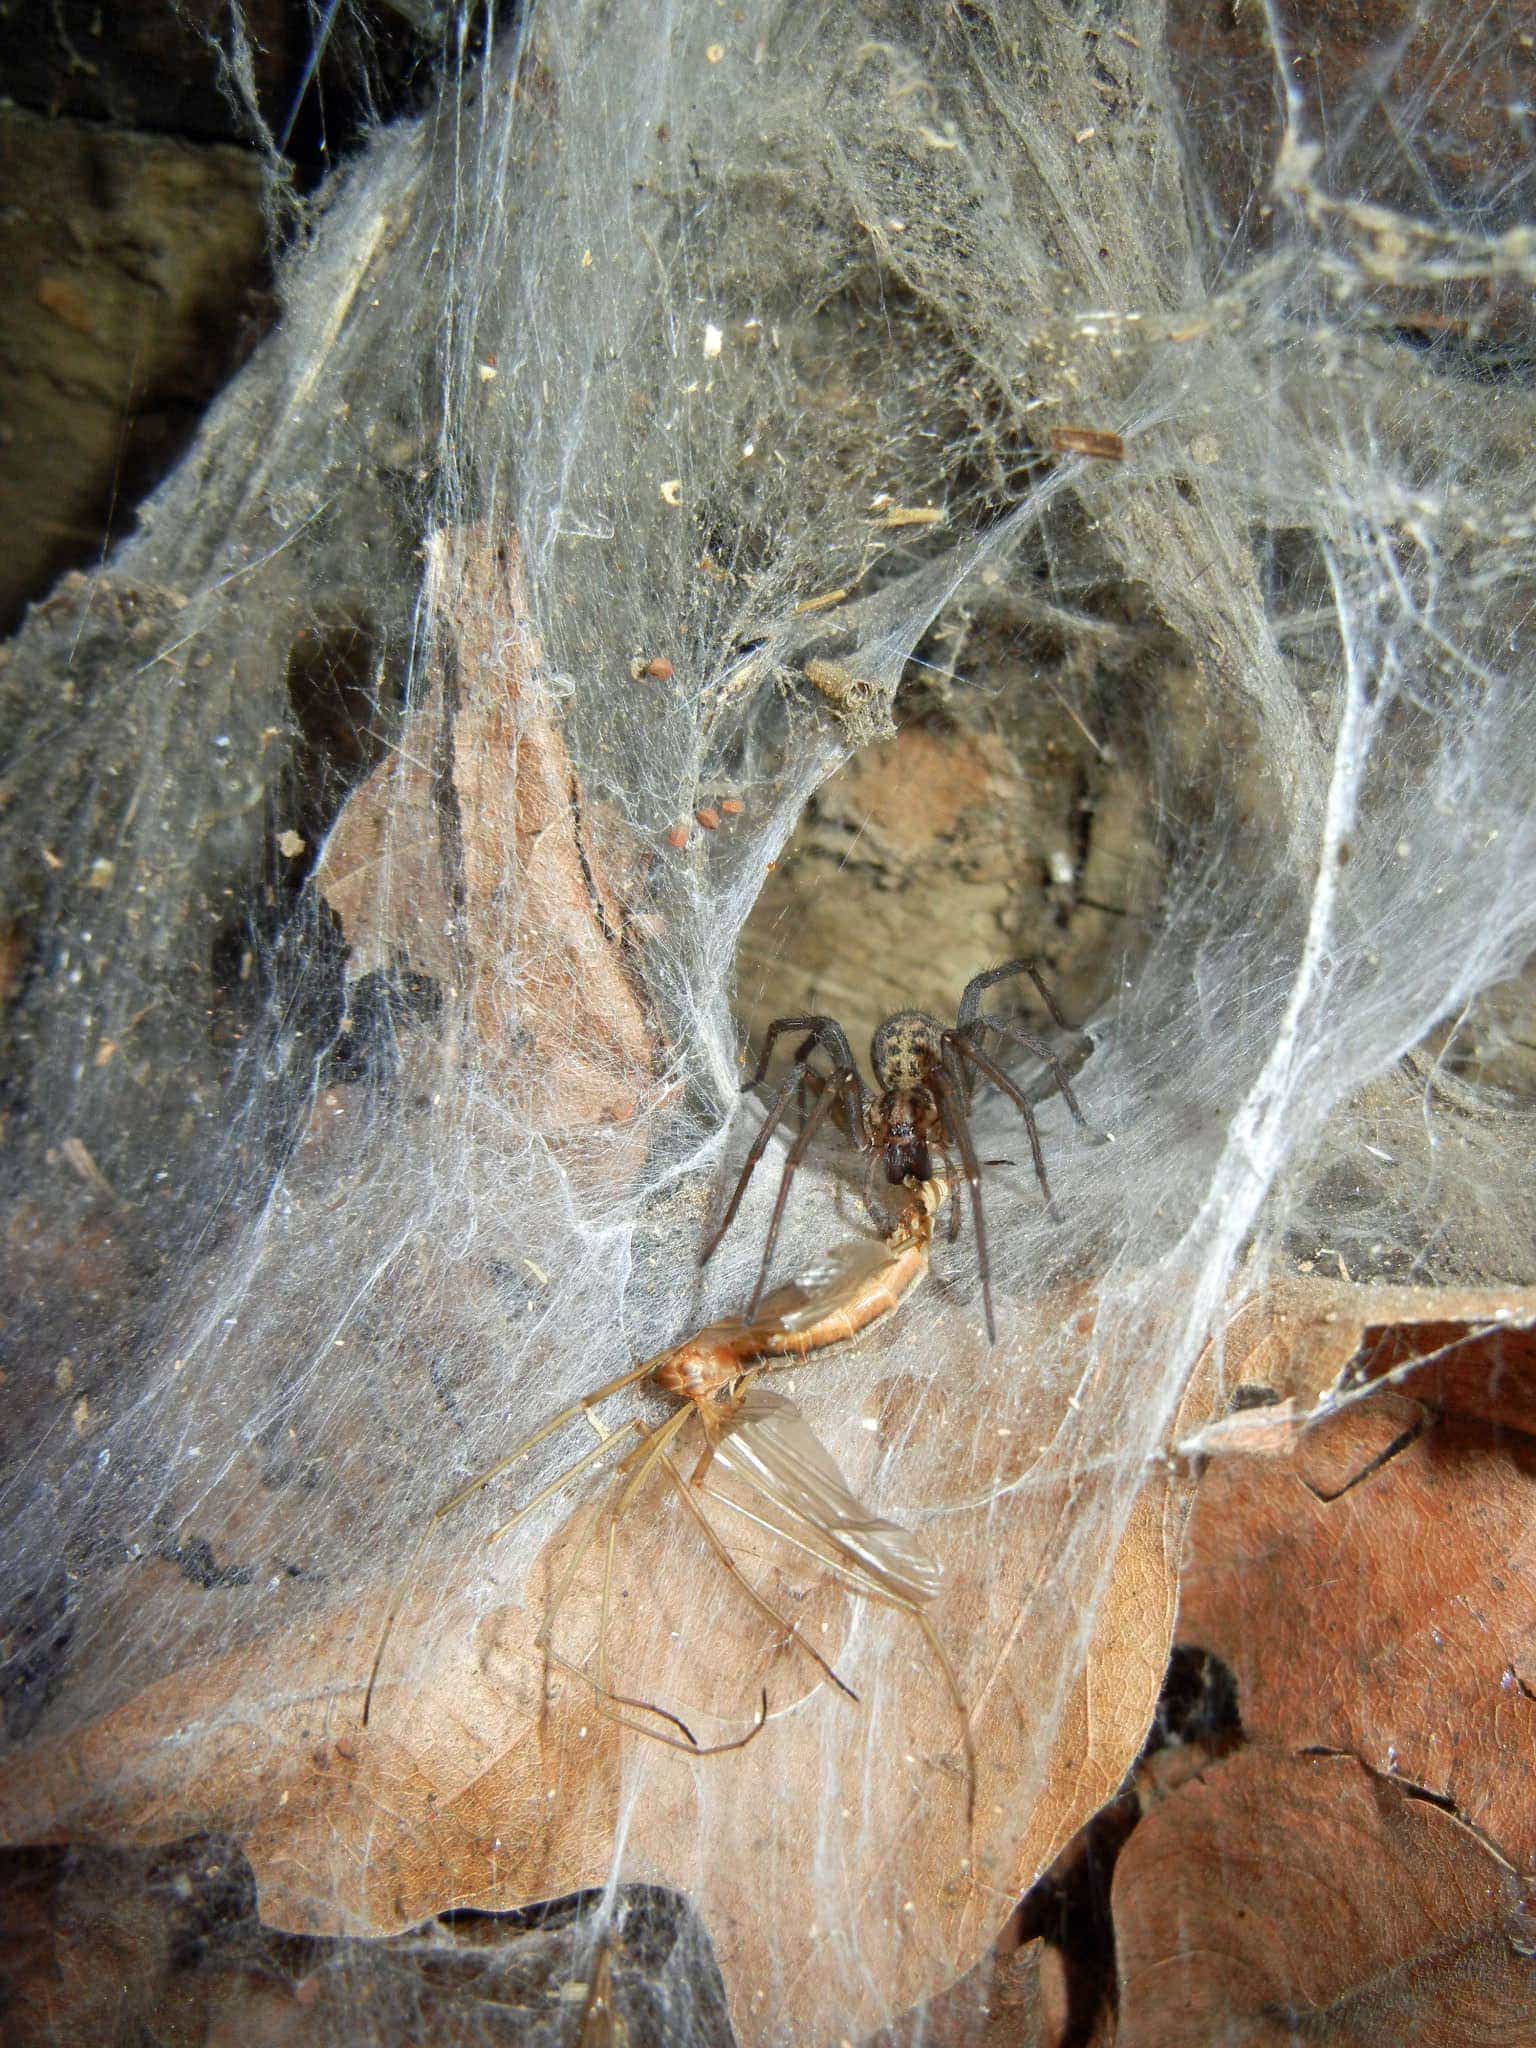 Picture of Eratigena atrica (Giant House Spider) - Female - Eyes,Webs